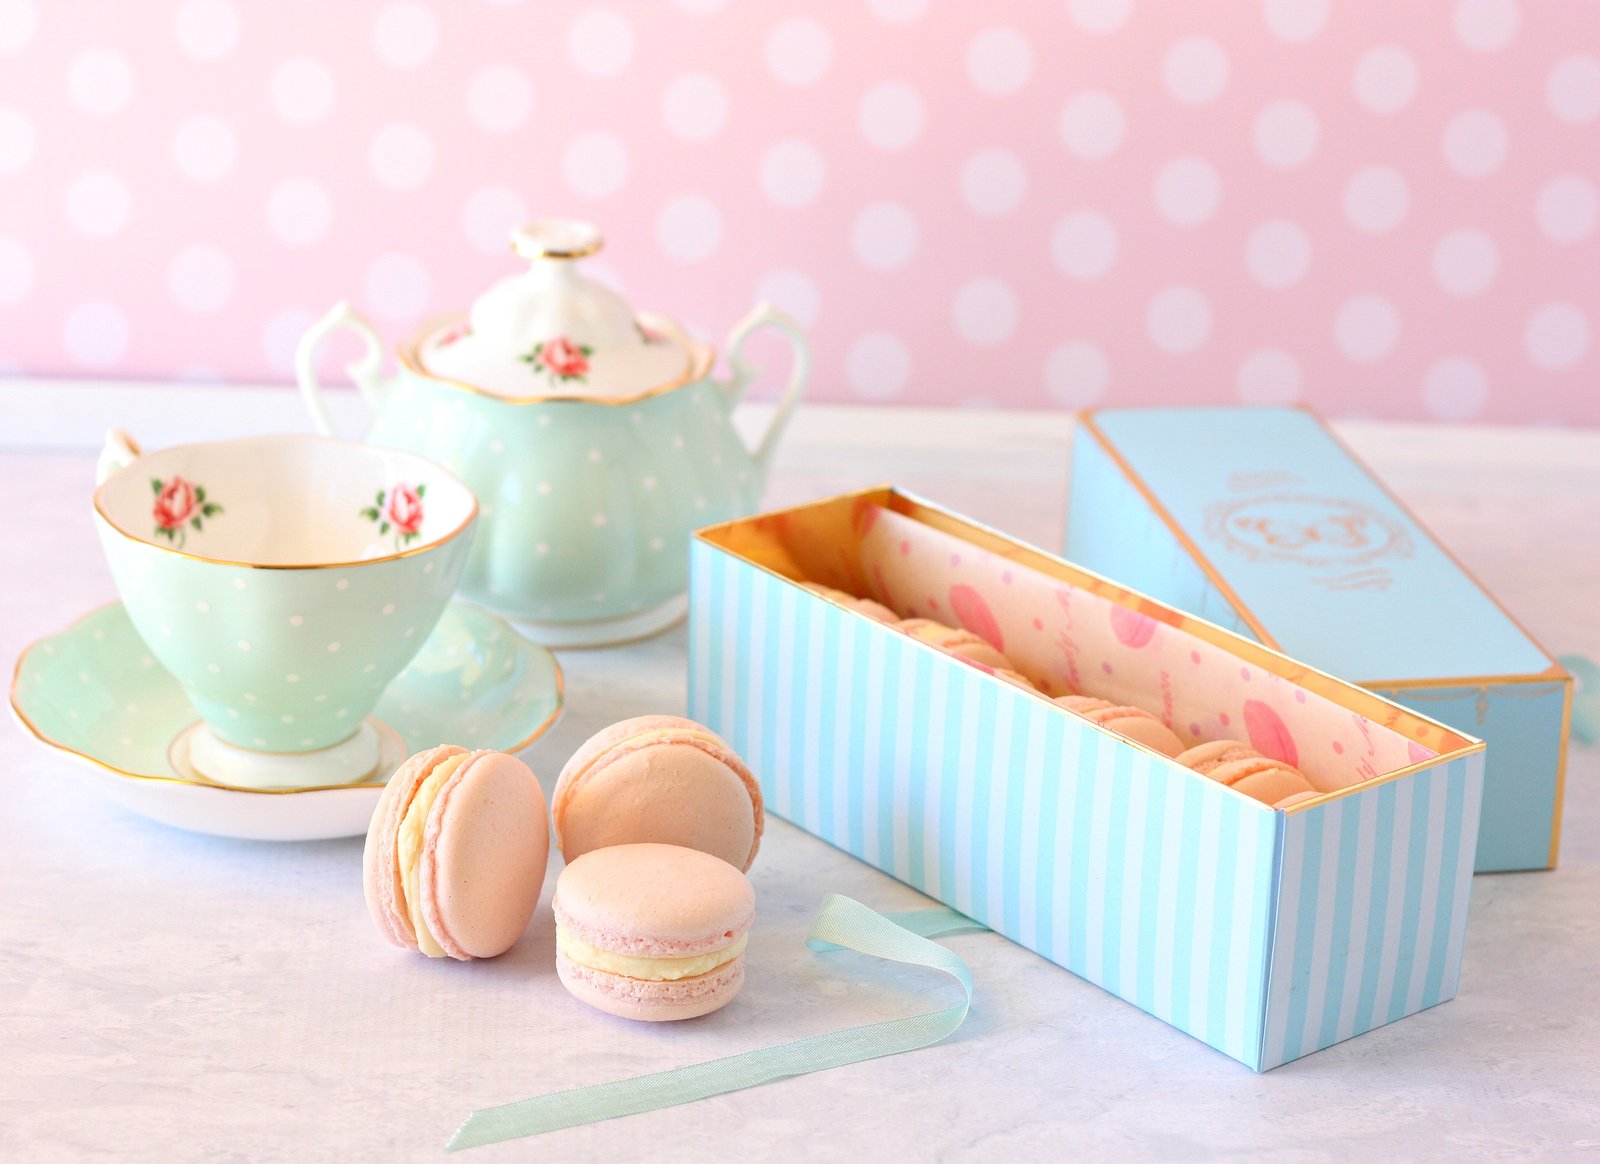 Vanilla Macarons by A Spoonful of Sugar